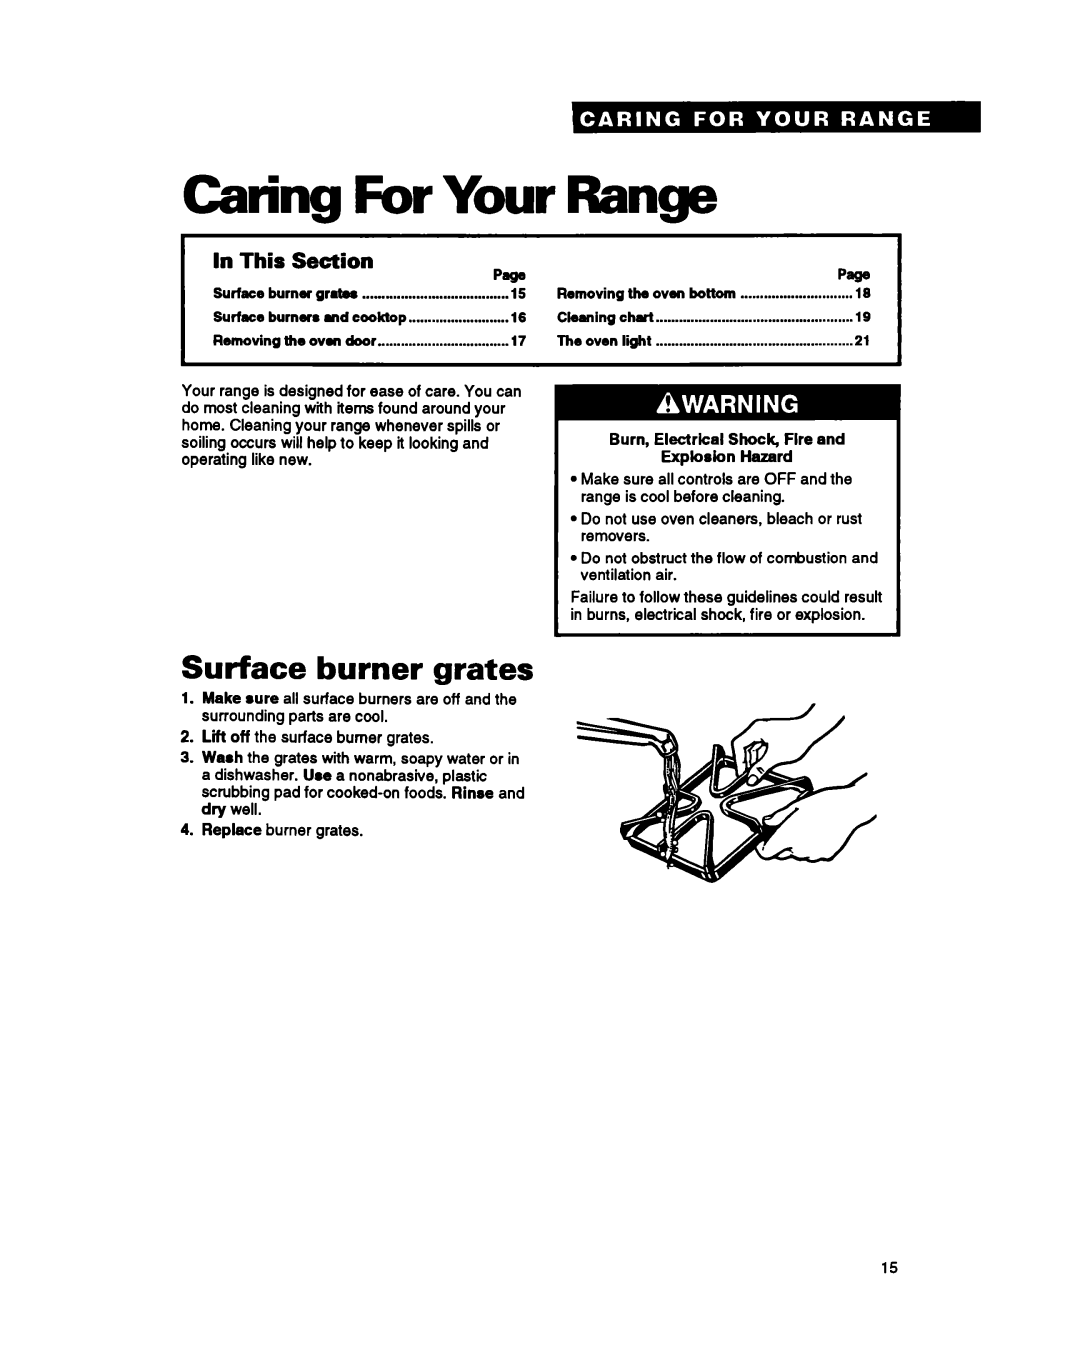 Whirlpool FGP357Y warranty Caring, For Your, Surface burner grates, Range, In This Section 